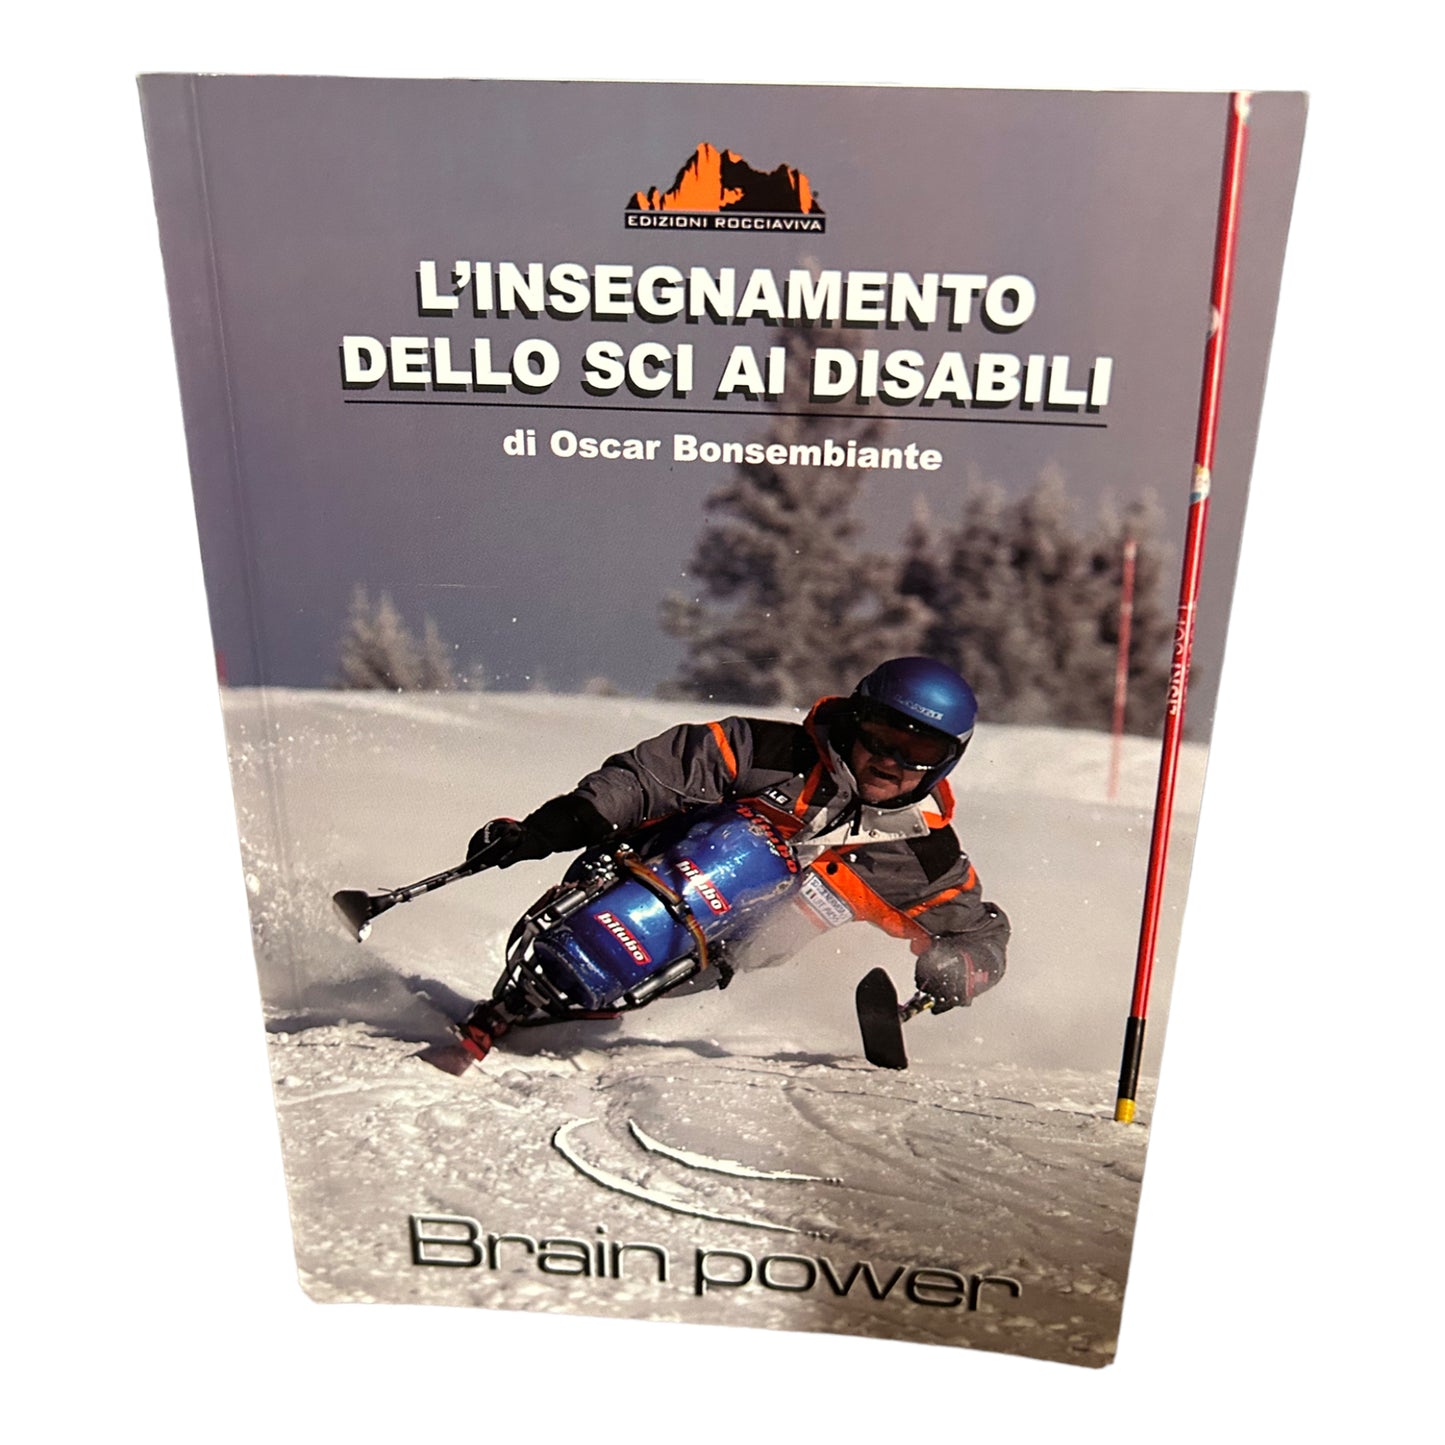 Teaching skiing to disabled people. Oscar Bonsembiante